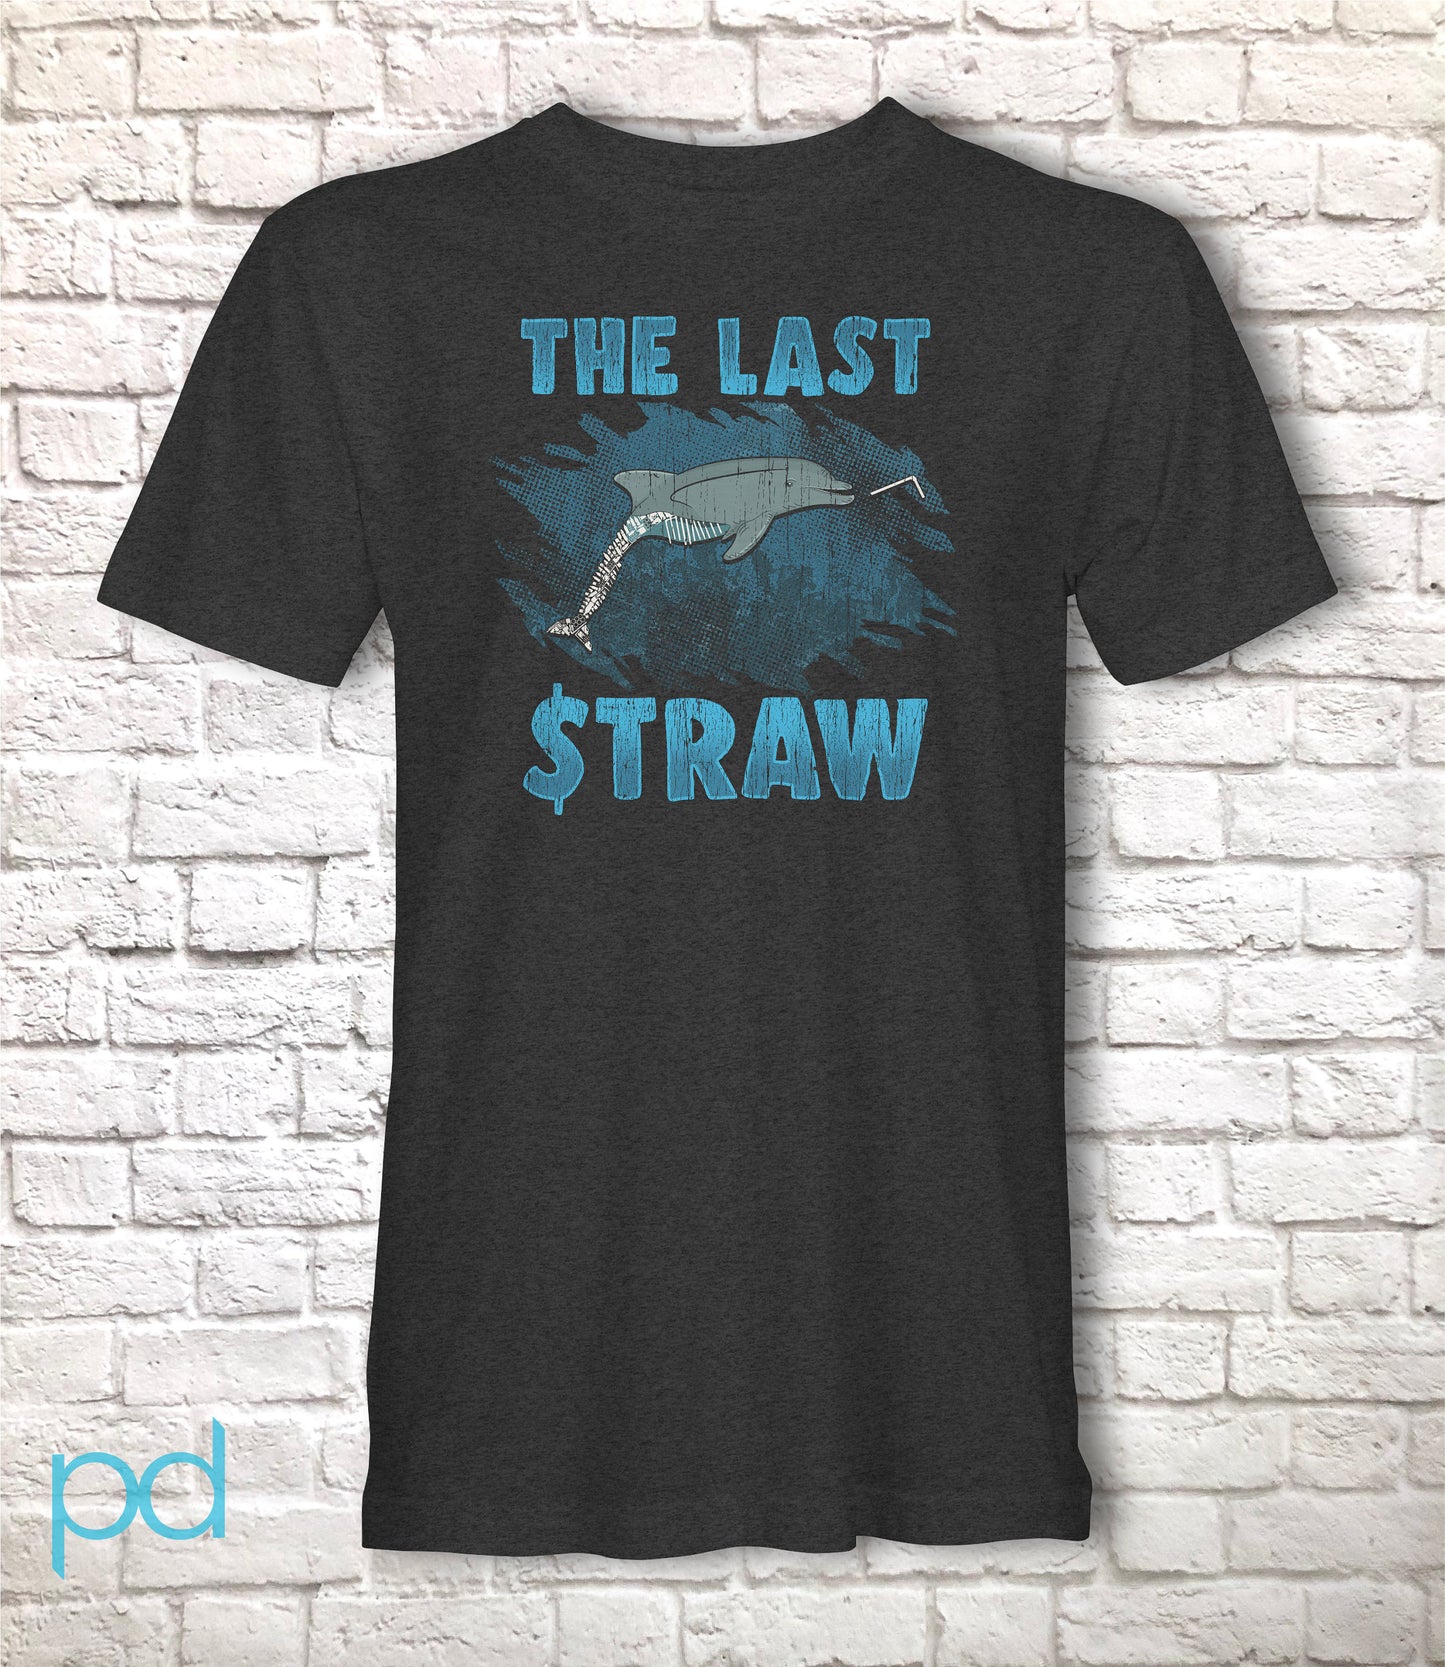 Keep The Sea Plastic Free Shirt, Skip A Straw Save A Turtle Gift Idea, There Is No Planet B Tee Shirt T Top